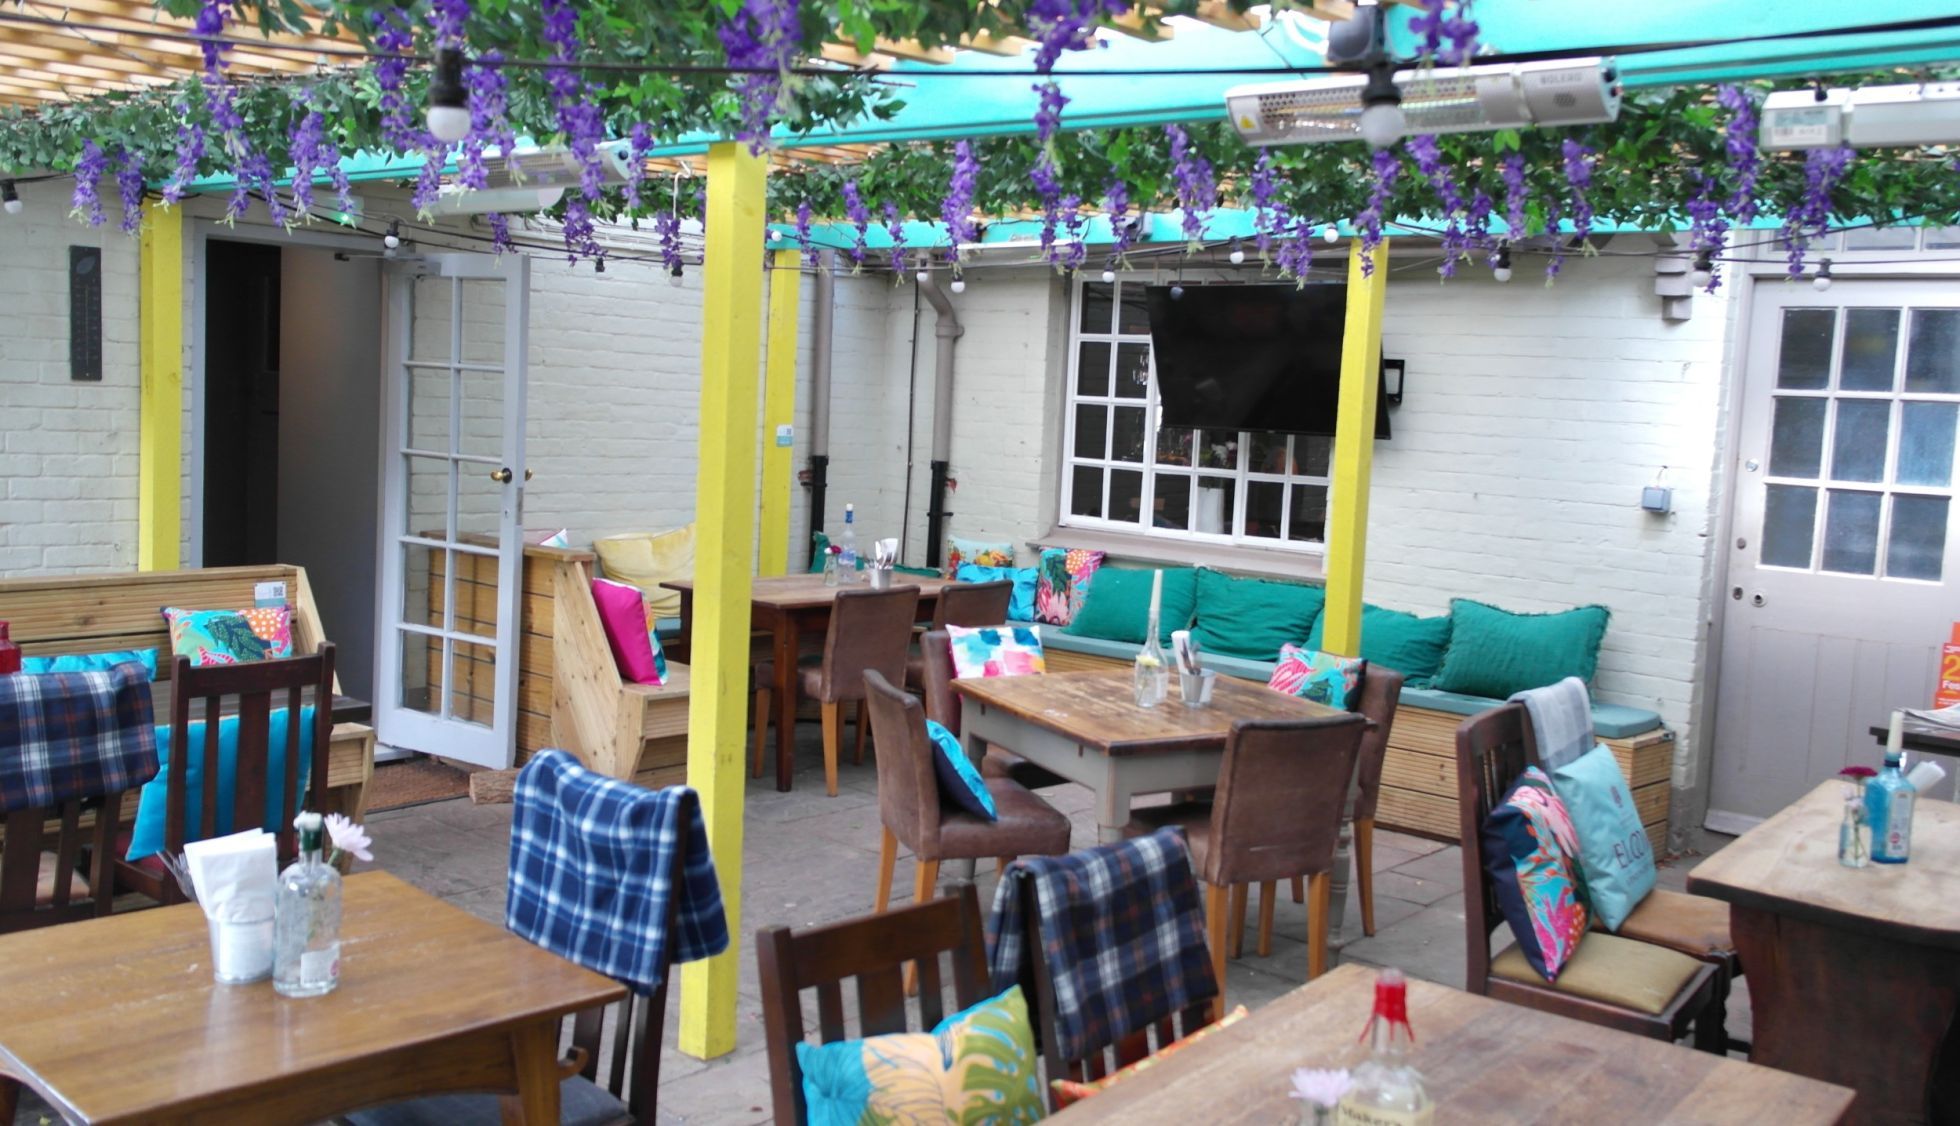 Outside heated covered terrace with flowers at the Thomas Lord in West Meon, Hampshire near Petersfield